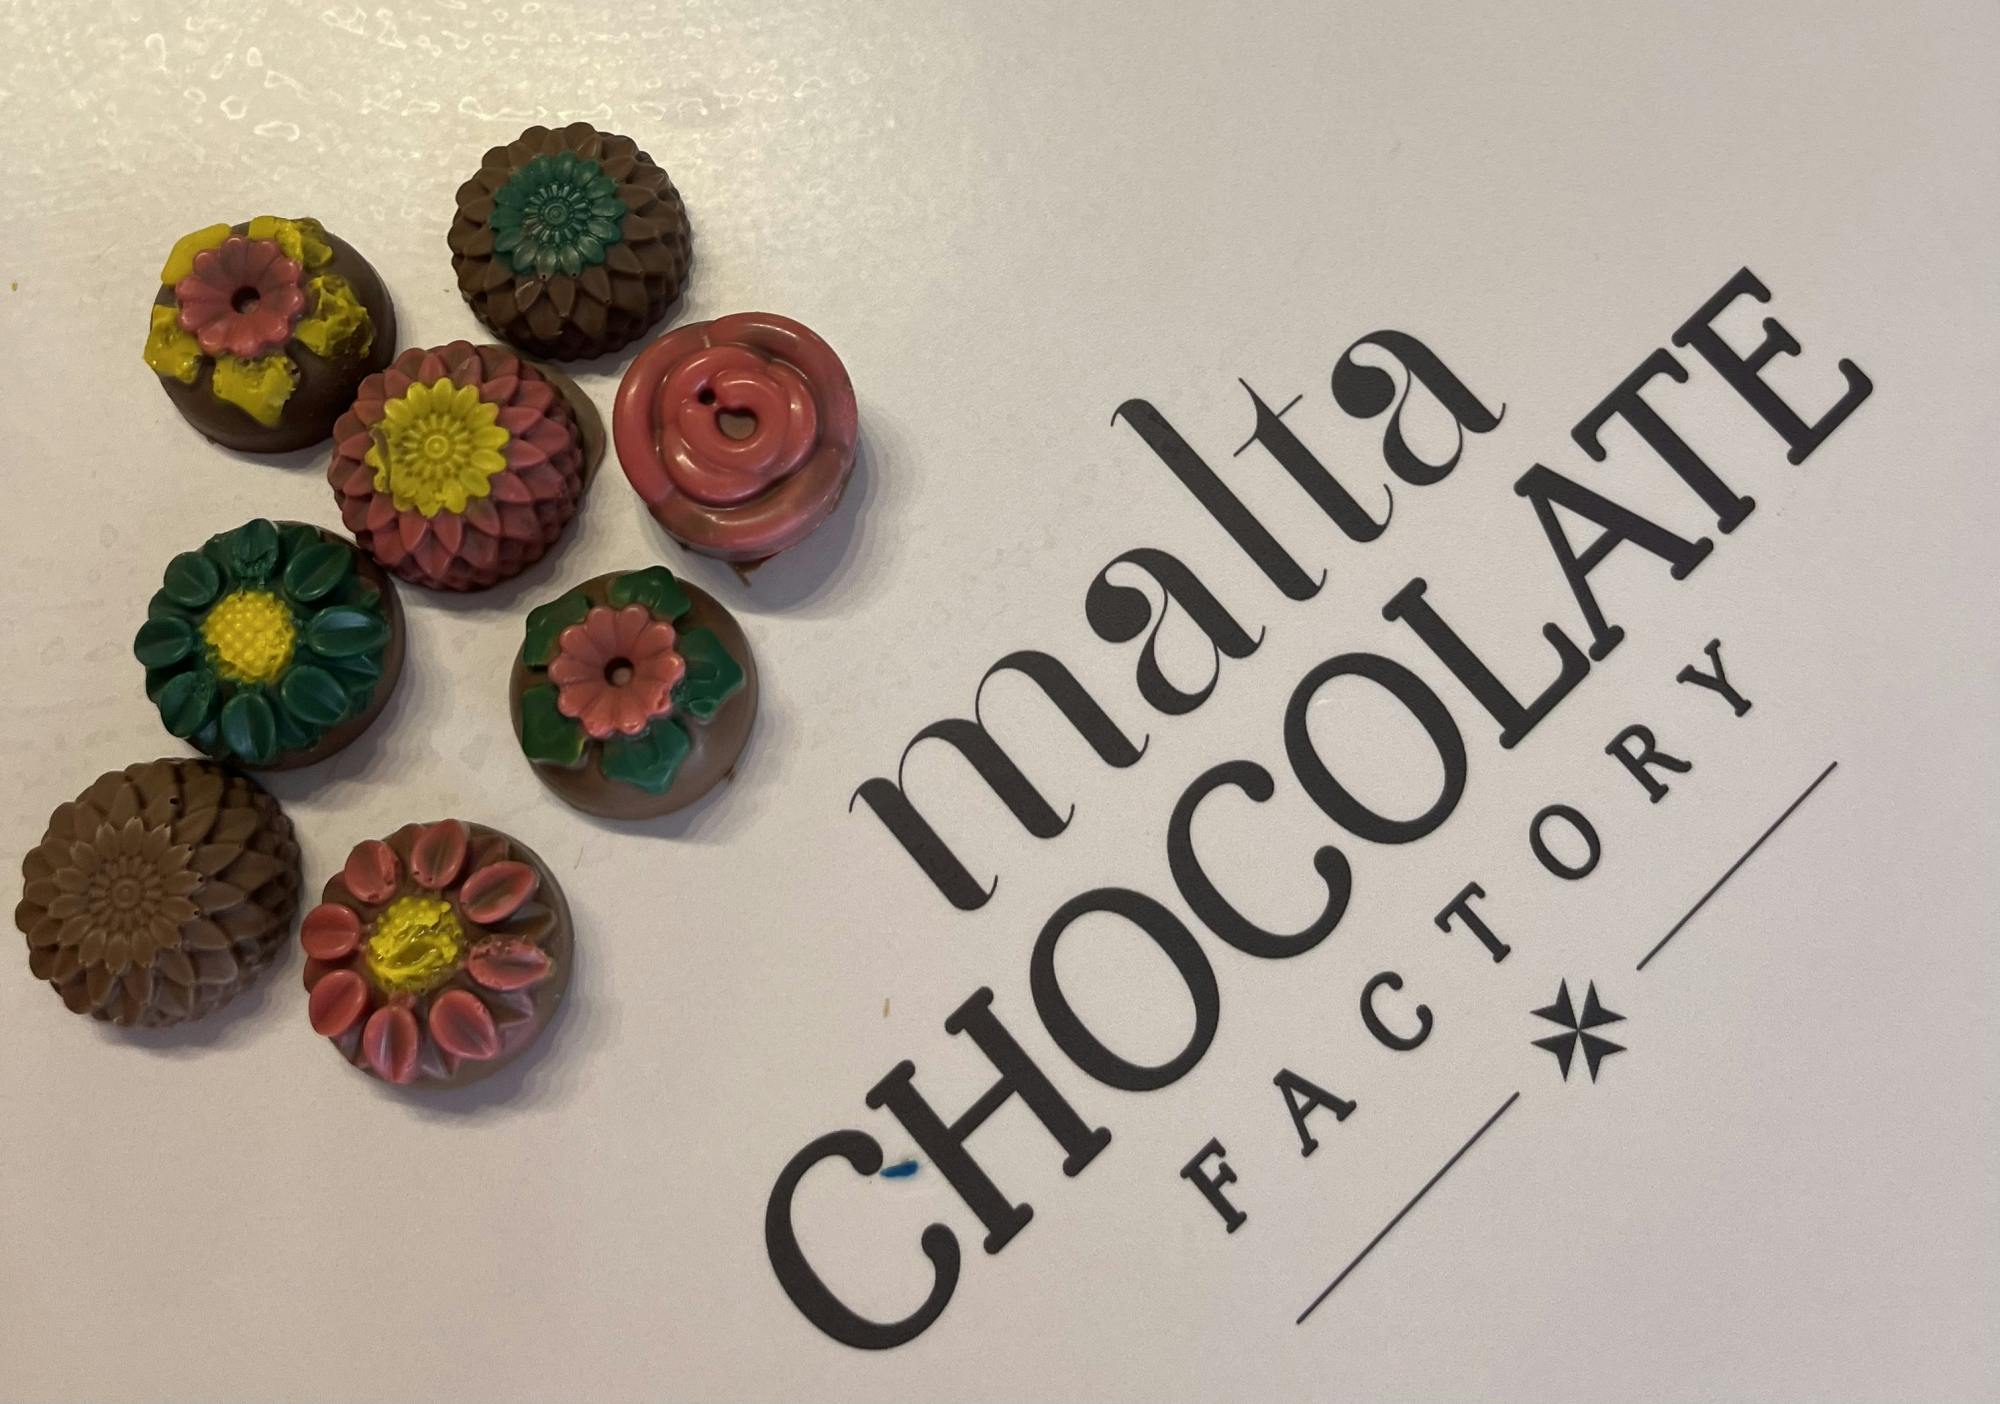 Chocolate making workshop for adults in Malta Musement